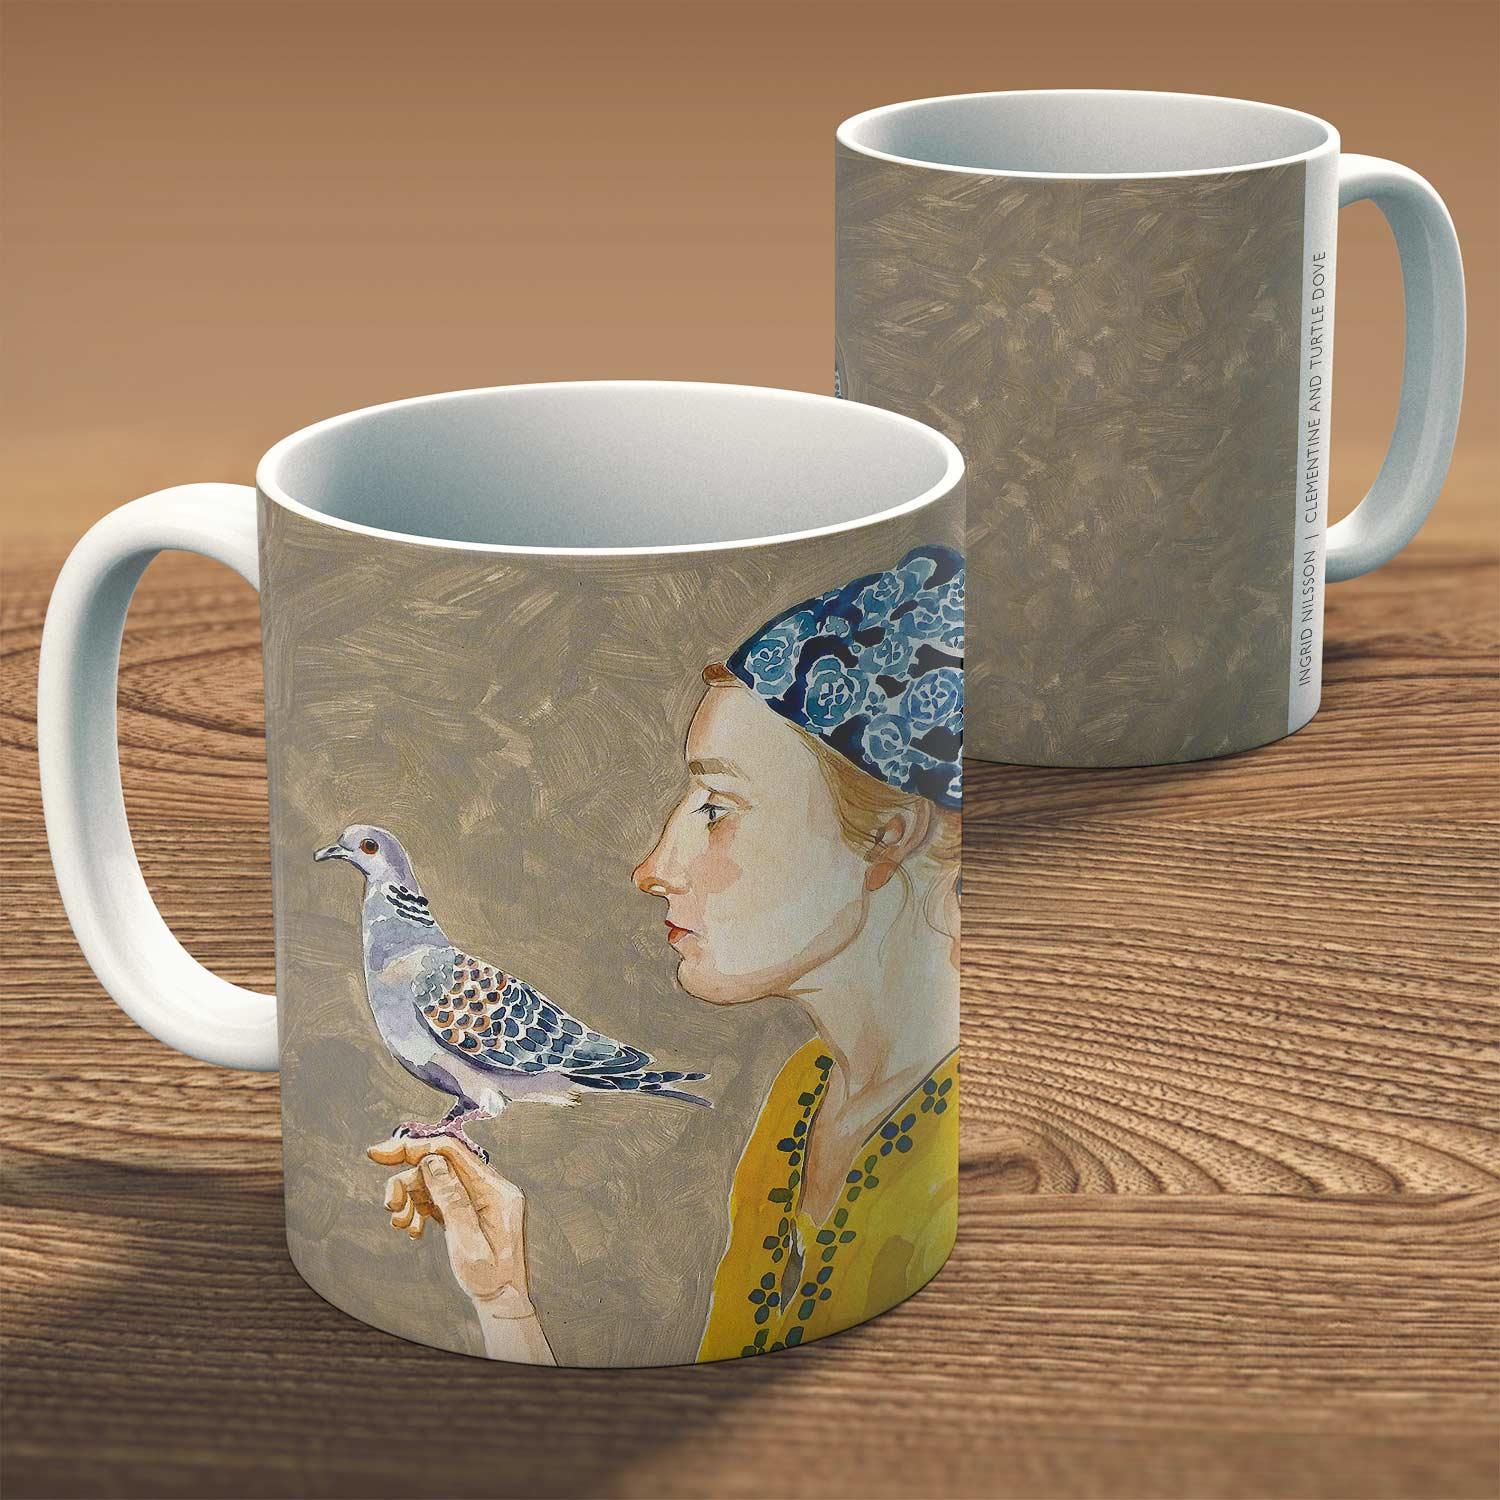 Clementine and Turtle Dove  Mug from an original painting by artist Ingrid Nilsson